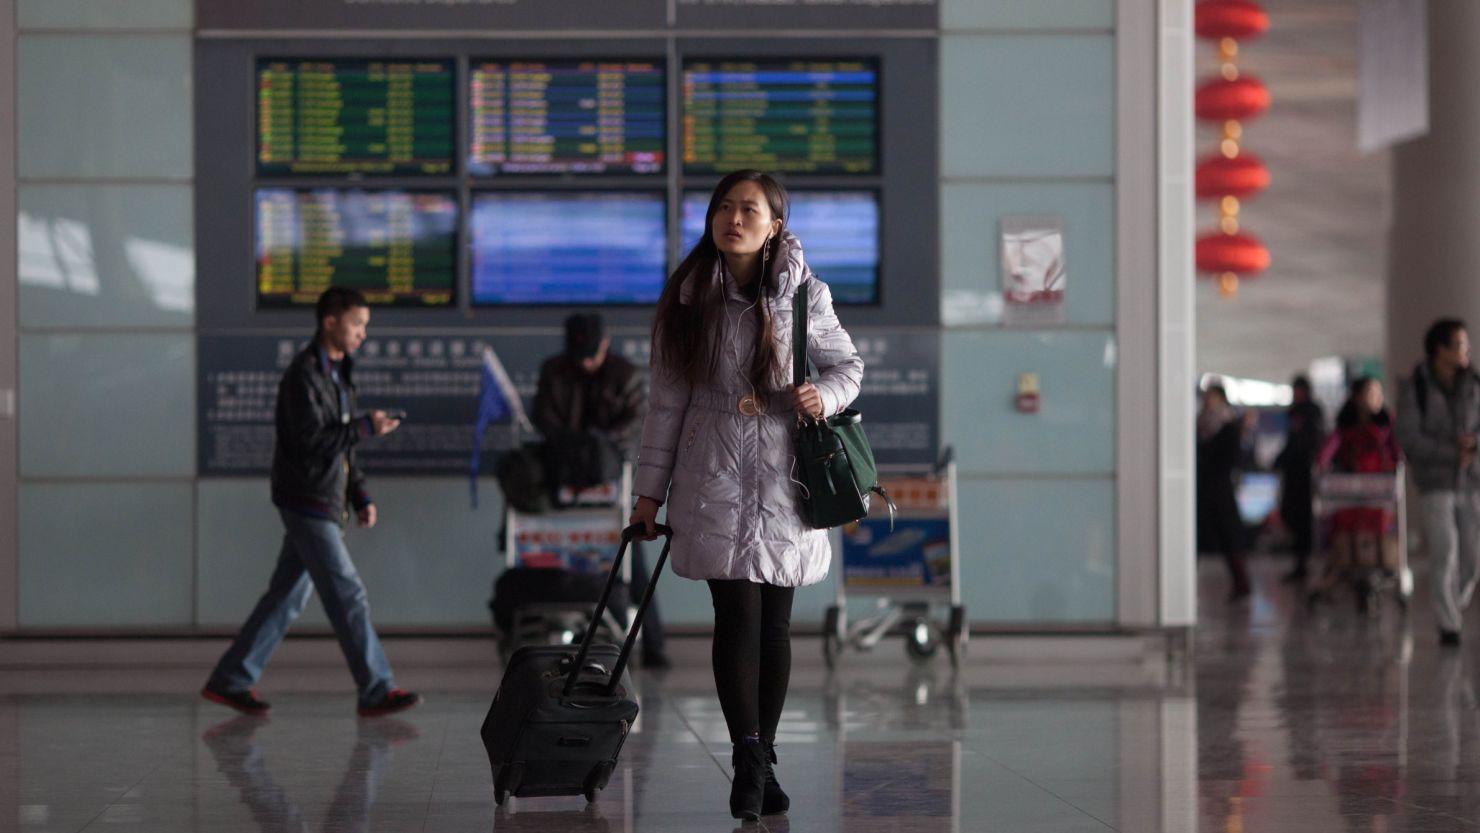 Many are leaving China for reasons like education, food and wealth security and air quality.